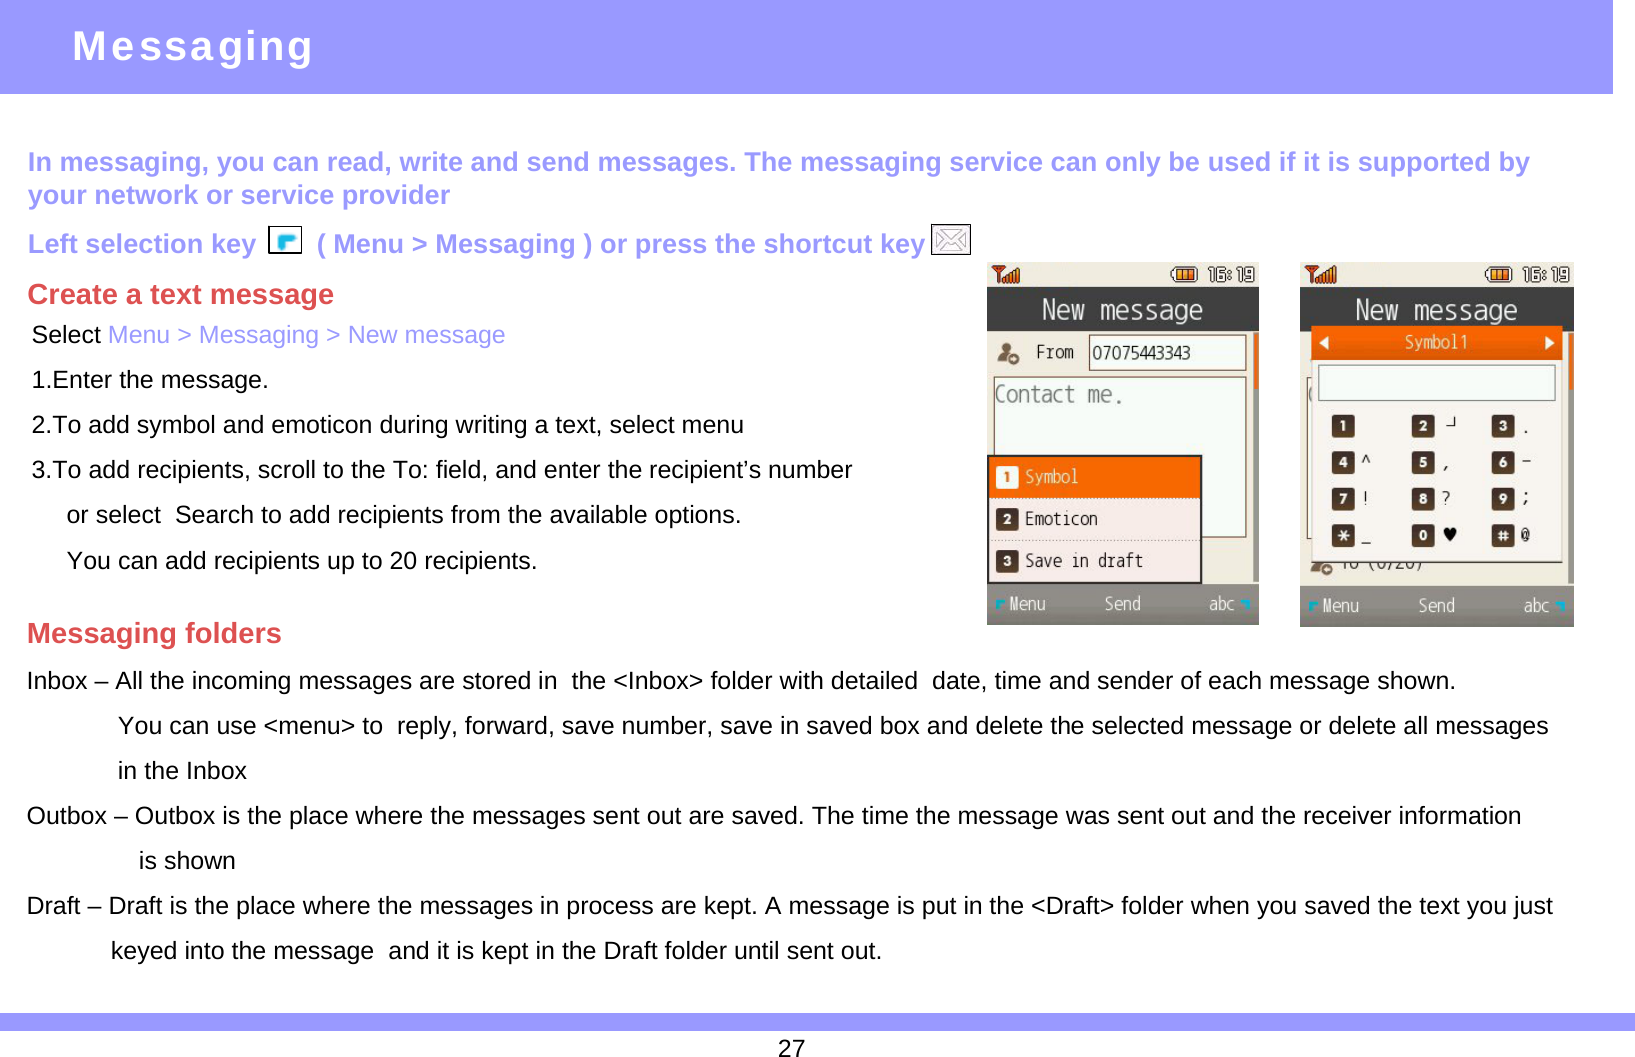 In messaging, you can read, write and send messages. The messaging service can only be used if it is supported by your network or service providerLeft selection key ( Menu &gt; Messaging ) or press the shortcut key Inbox – All the incoming messages are stored in  the &lt;Inbox&gt; folder with detailed  date, time and sender of each message shown.You can use &lt;menu&gt; to  reply, forward, save number, save in saved box and delete the selected message or delete all messagesin the InboxOutbox – Outbox is the place where the messages sent out are saved. The time the message was sent out and the receiver information is shownDraft – Draft is the place where the messages in process are kept. A message is put in the &lt;Draft&gt; folder when you saved the text you just       keyed into the message  and it is kept in the Draft folder until sent out.MessagingMessaging foldersCreate a text messageSelect Menu &gt; Messaging &gt; New message1.Enter the message.2.To add symbol and emoticon during writing a text, select menu3.To add recipients, scroll to the To: field, and enter the recipient’s number or select  Search to add recipients from the available options.You can add recipients up to 20 recipients.27